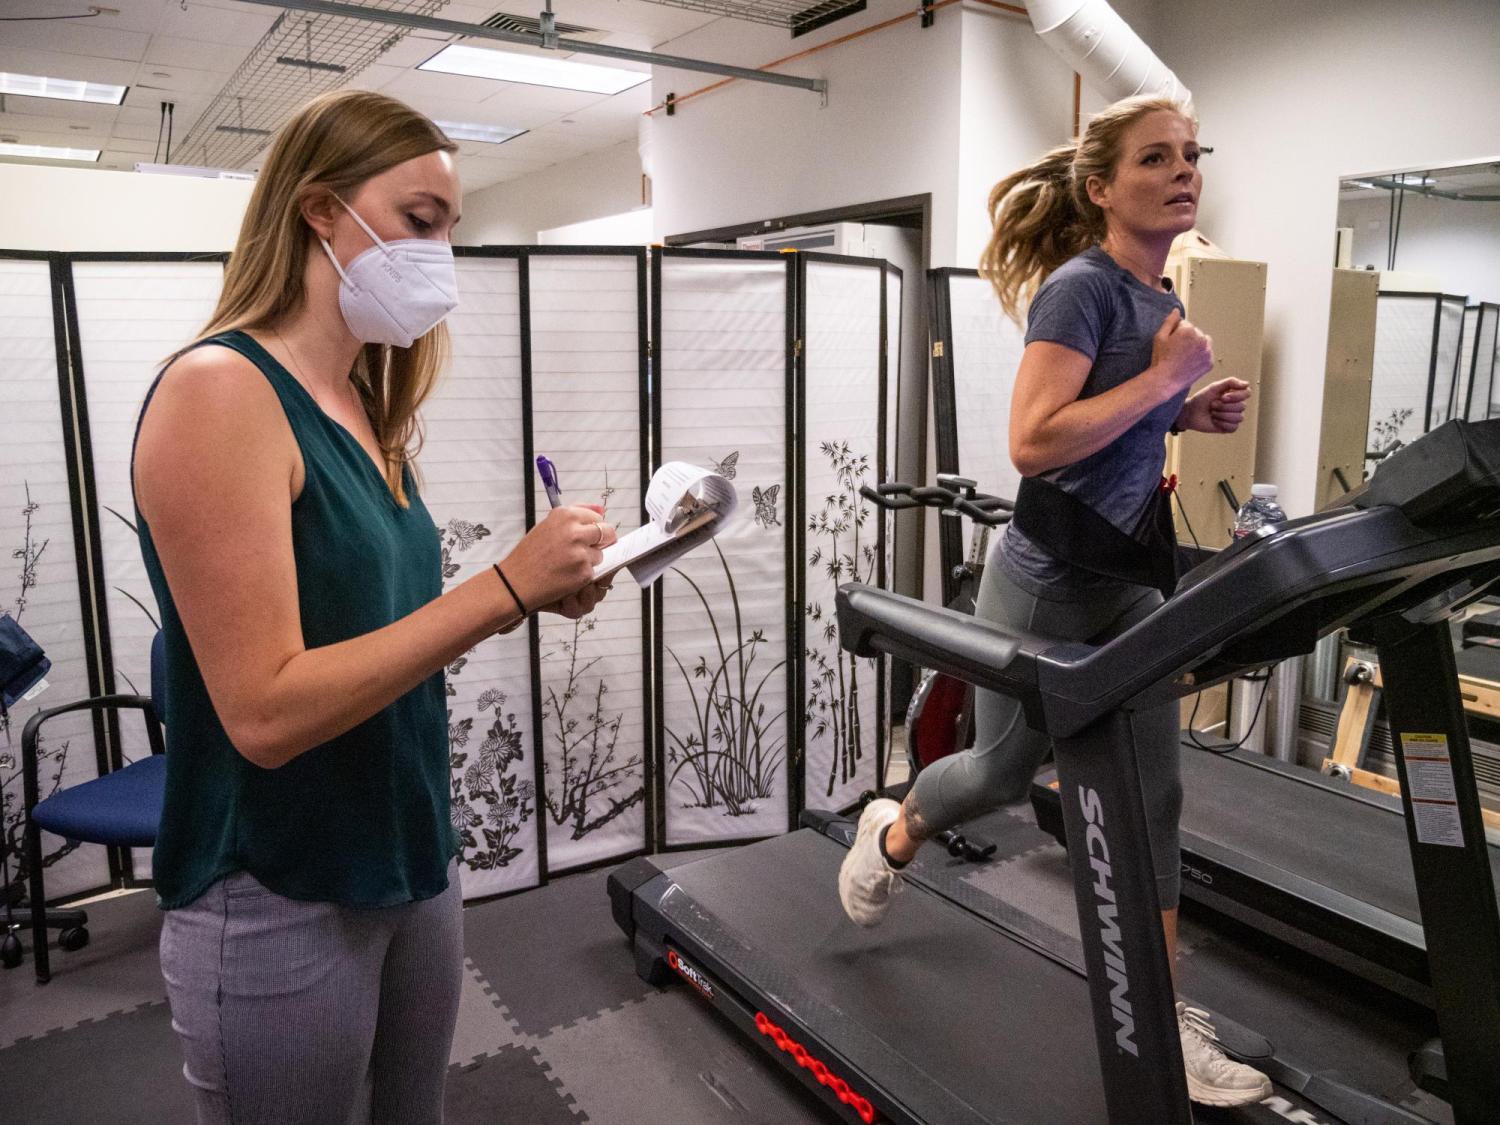 New take on runner's high: Study explores how marijuana affects workouts, CU Boulder Today